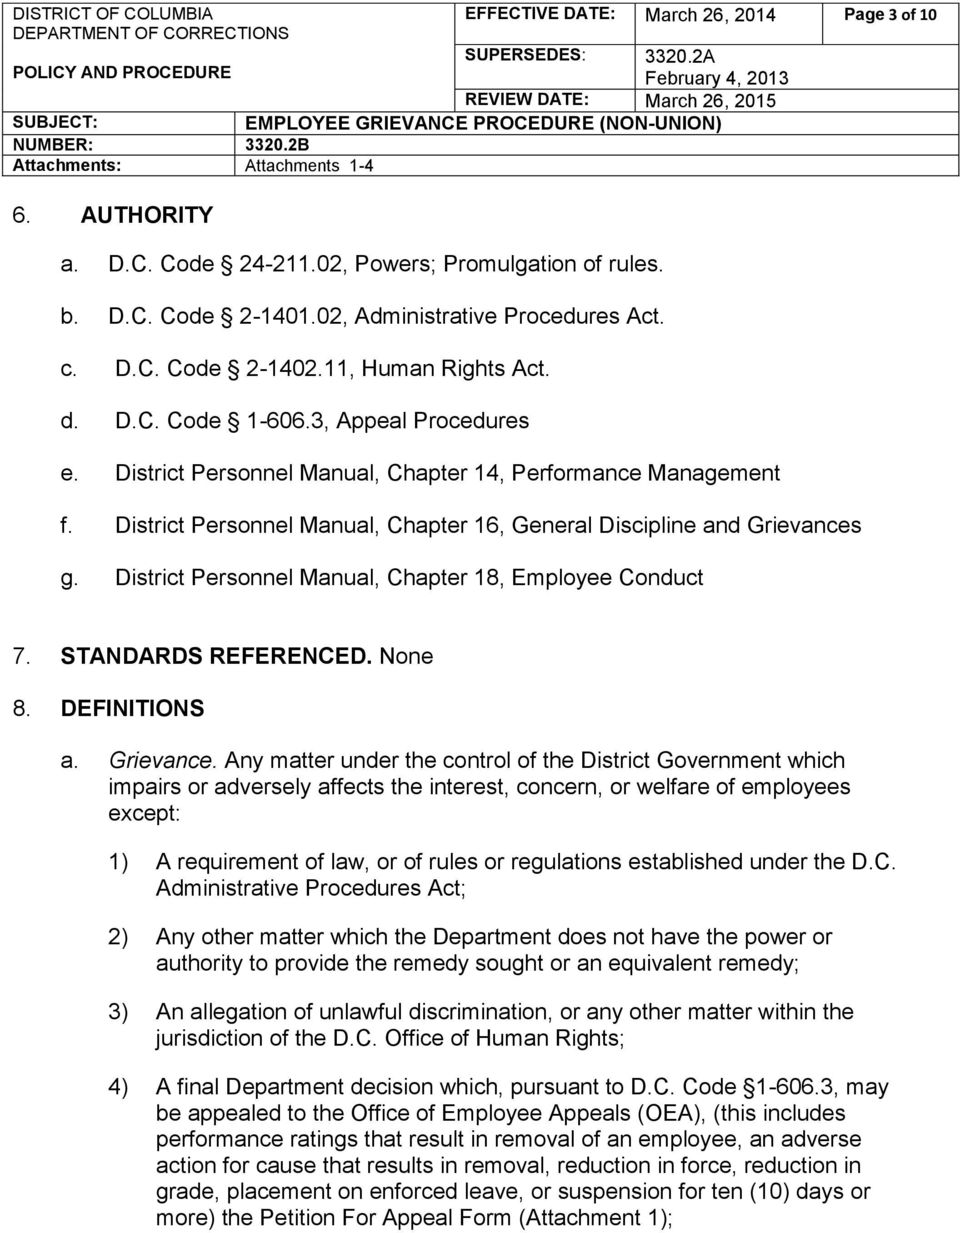 District Personnel Manual, Chapter 16, General Discipline and Grievances